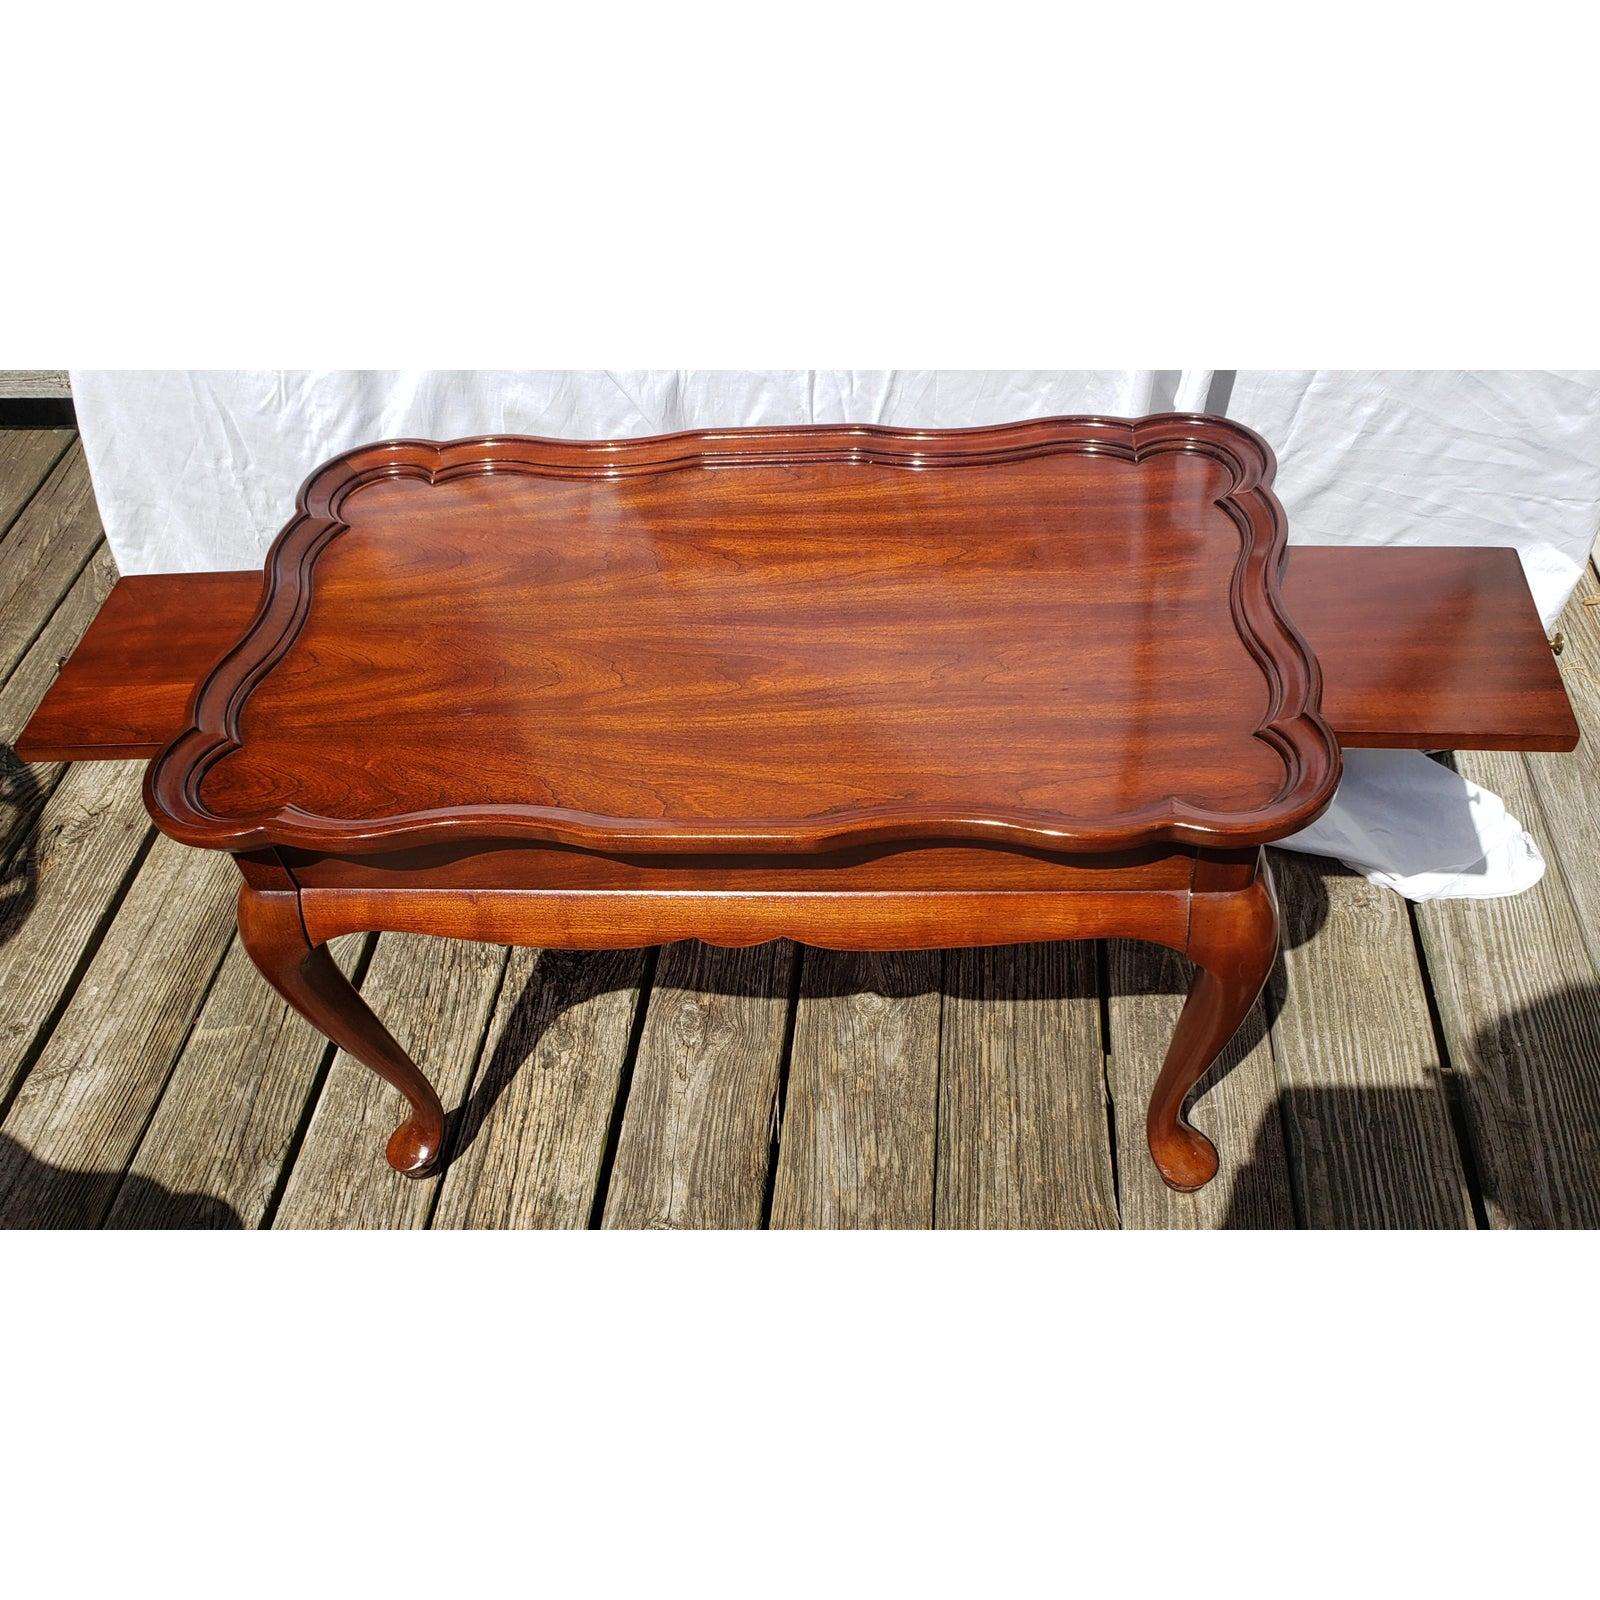 Superior Furniture Mid-Century Modern solid walnut coffee table with scallop edge and pull out trays. 30W x 18D x 18.75H. 7